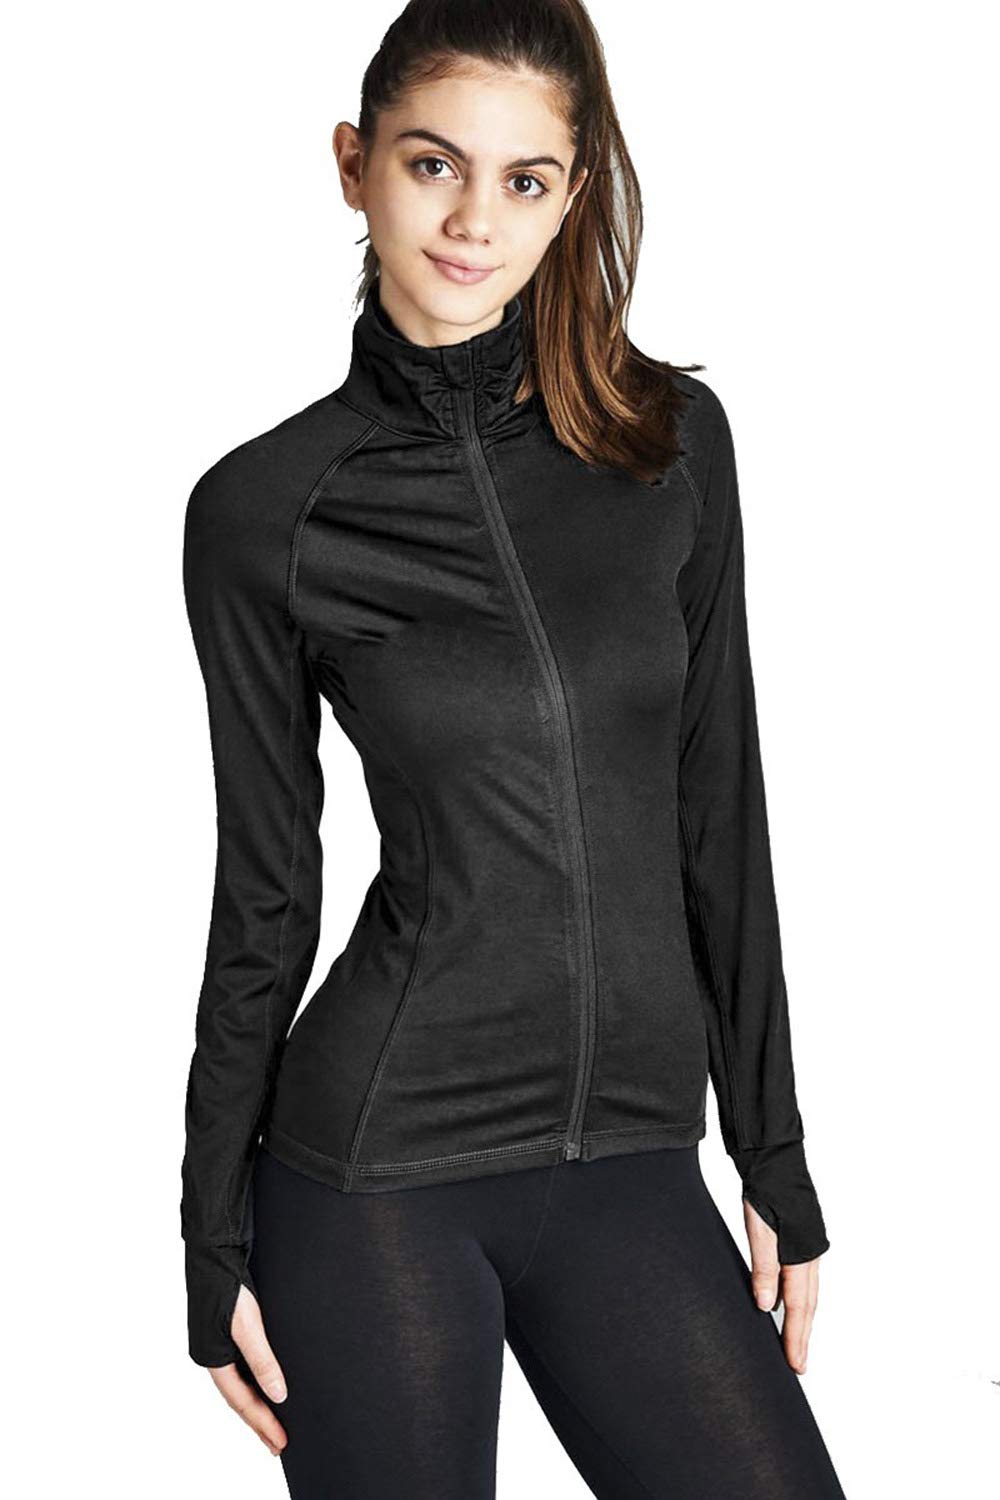 Women's Long Sleeve Zip up Athletic wear sweater Work Out Gym jacket